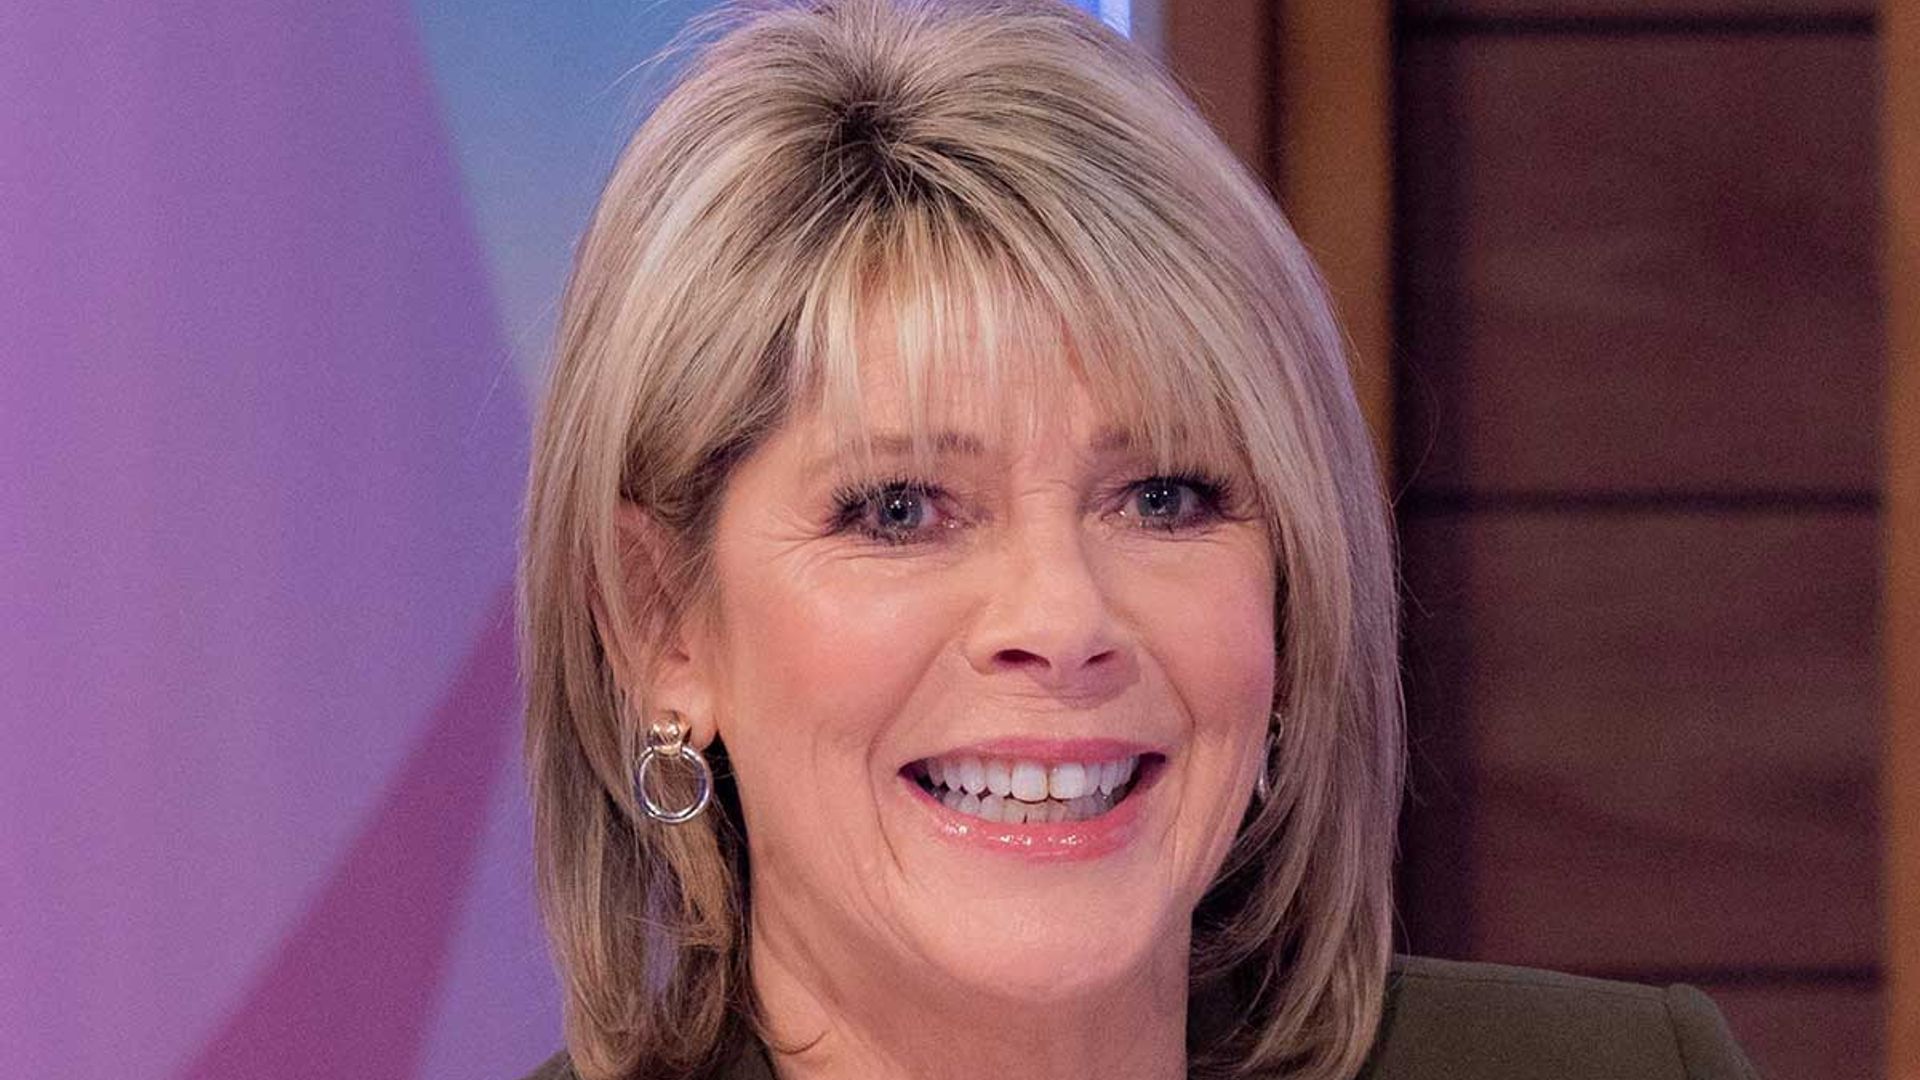 Ruth Langsford's £29.99 Zara blouse comes in the most striking print